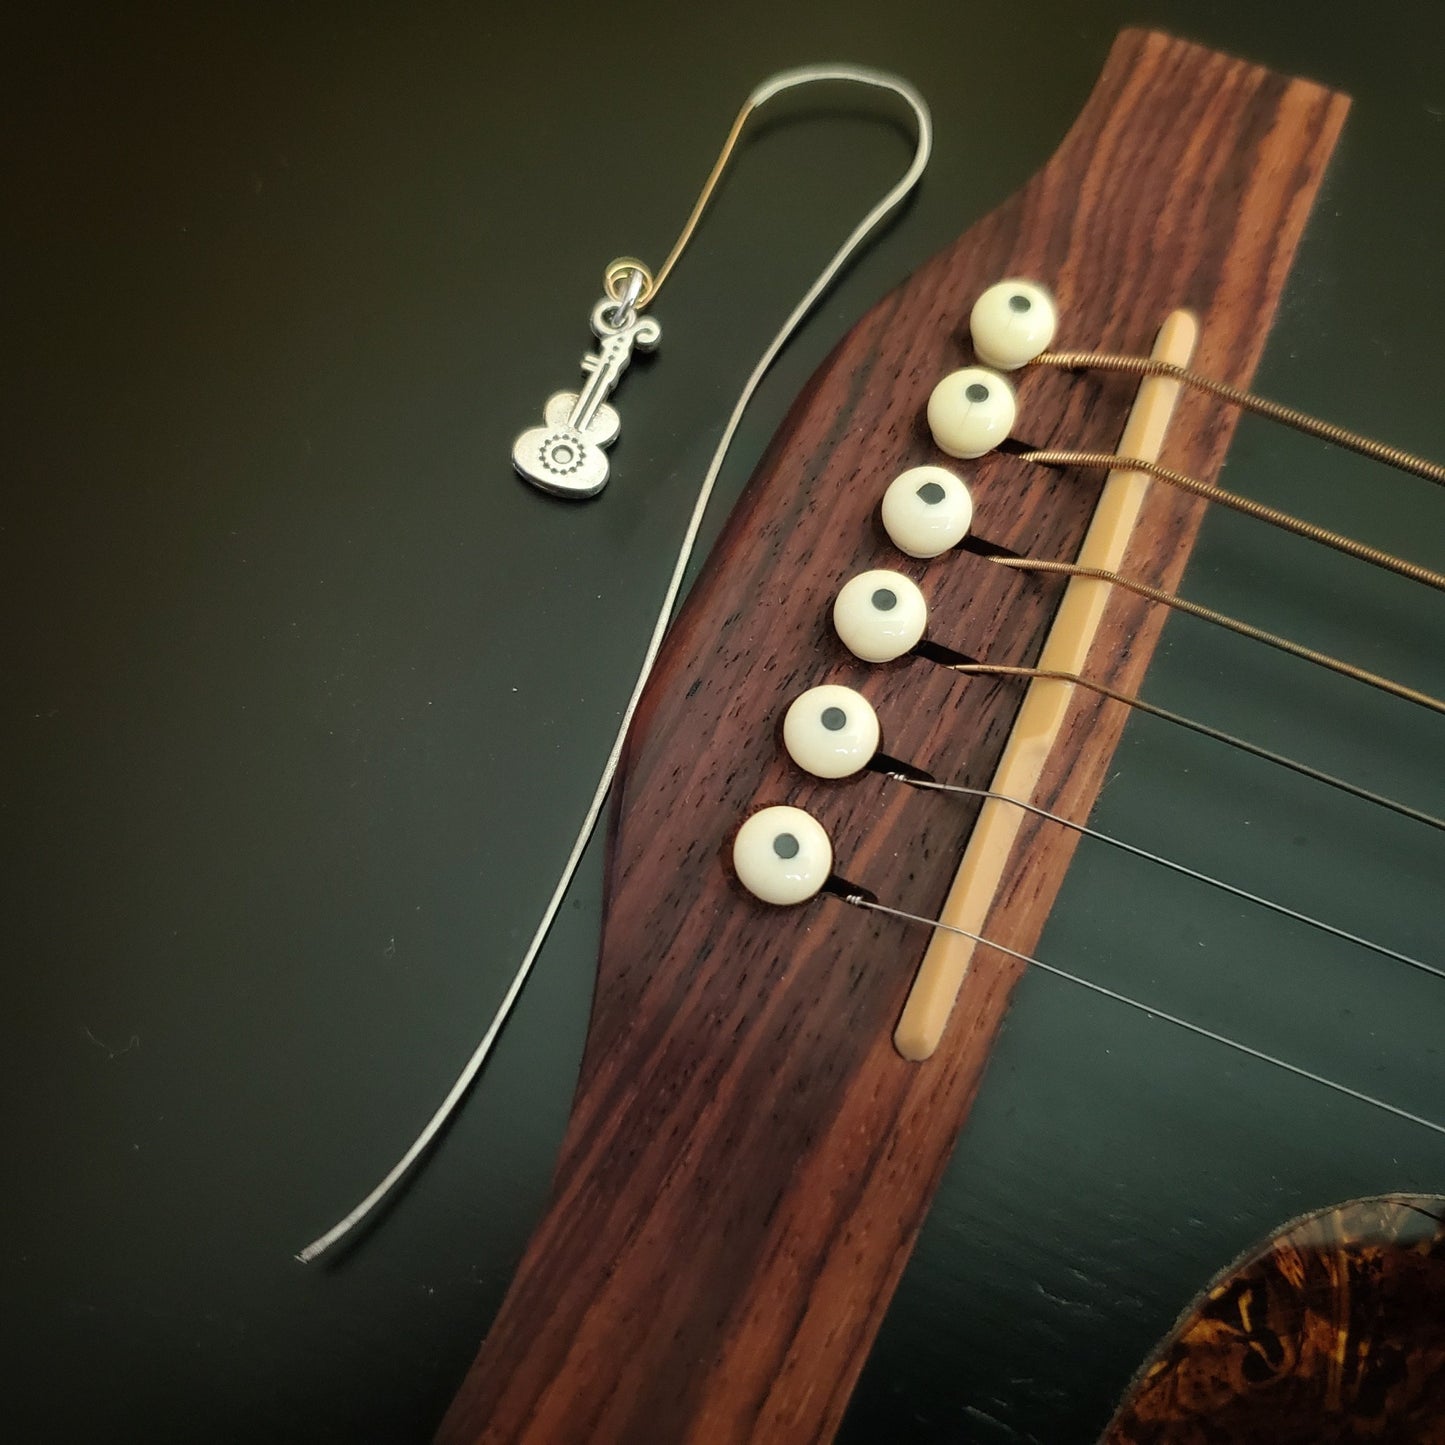 hook style bookmark made from an upcycled guitar string and a guitar shaped charm sitting on a black guitar